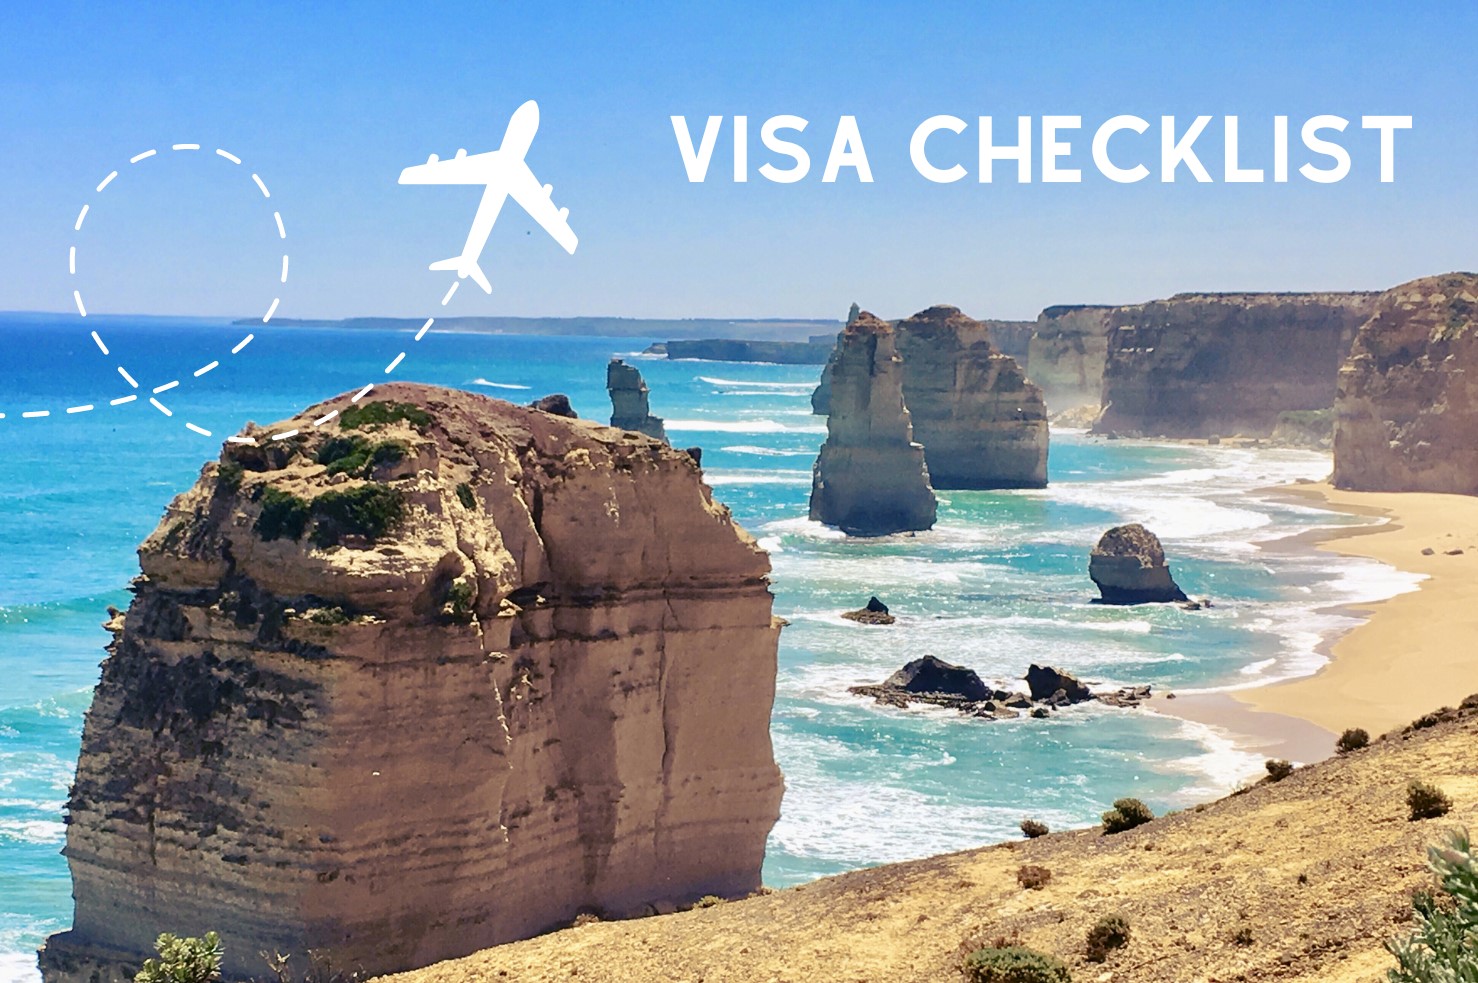 iMAGE OF THE 12 APOSTLES IN vICTORIA AS A HEADER FOR THE VISA CHECKLIST BLOG.